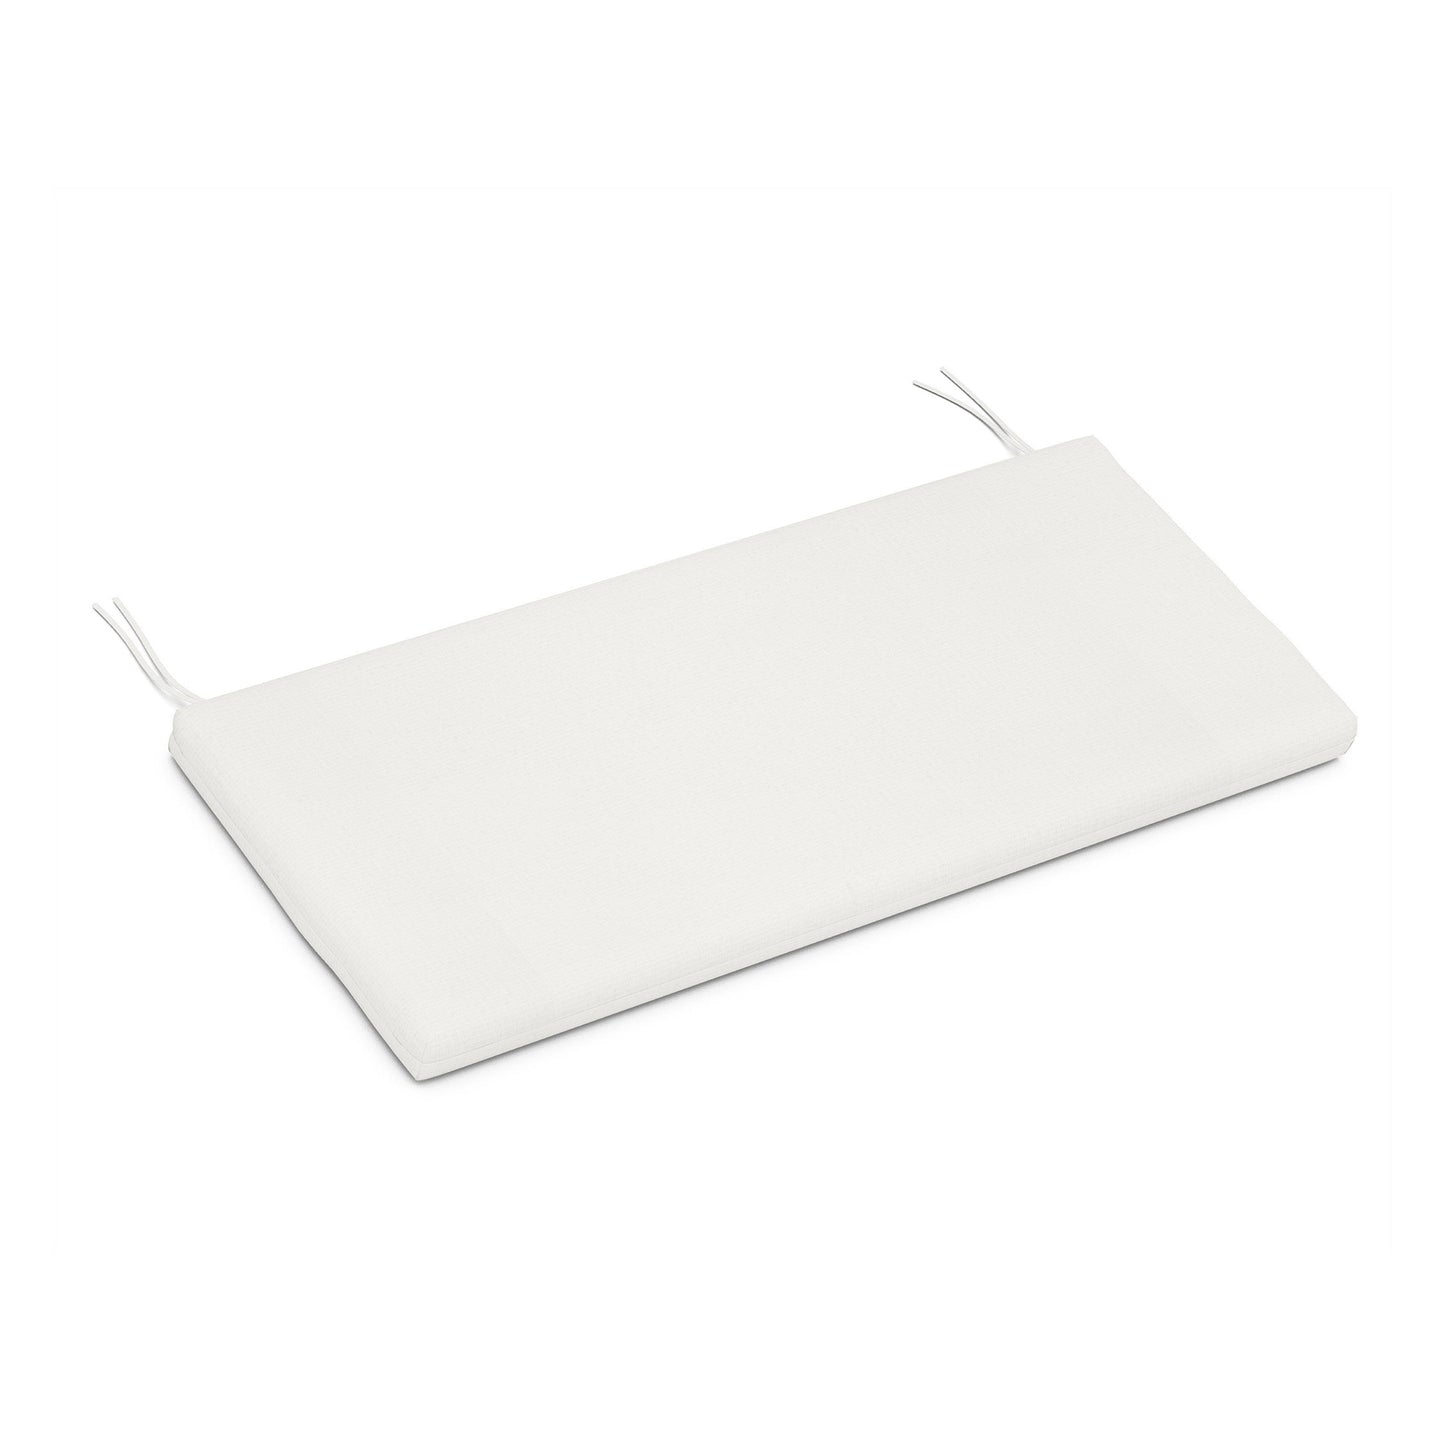 A white rectangular POLYWOOD seat cushion with two ties on each short end, crafted from weather-resistant upholstery fabric, displayed on a white background for a streamlined appearance.